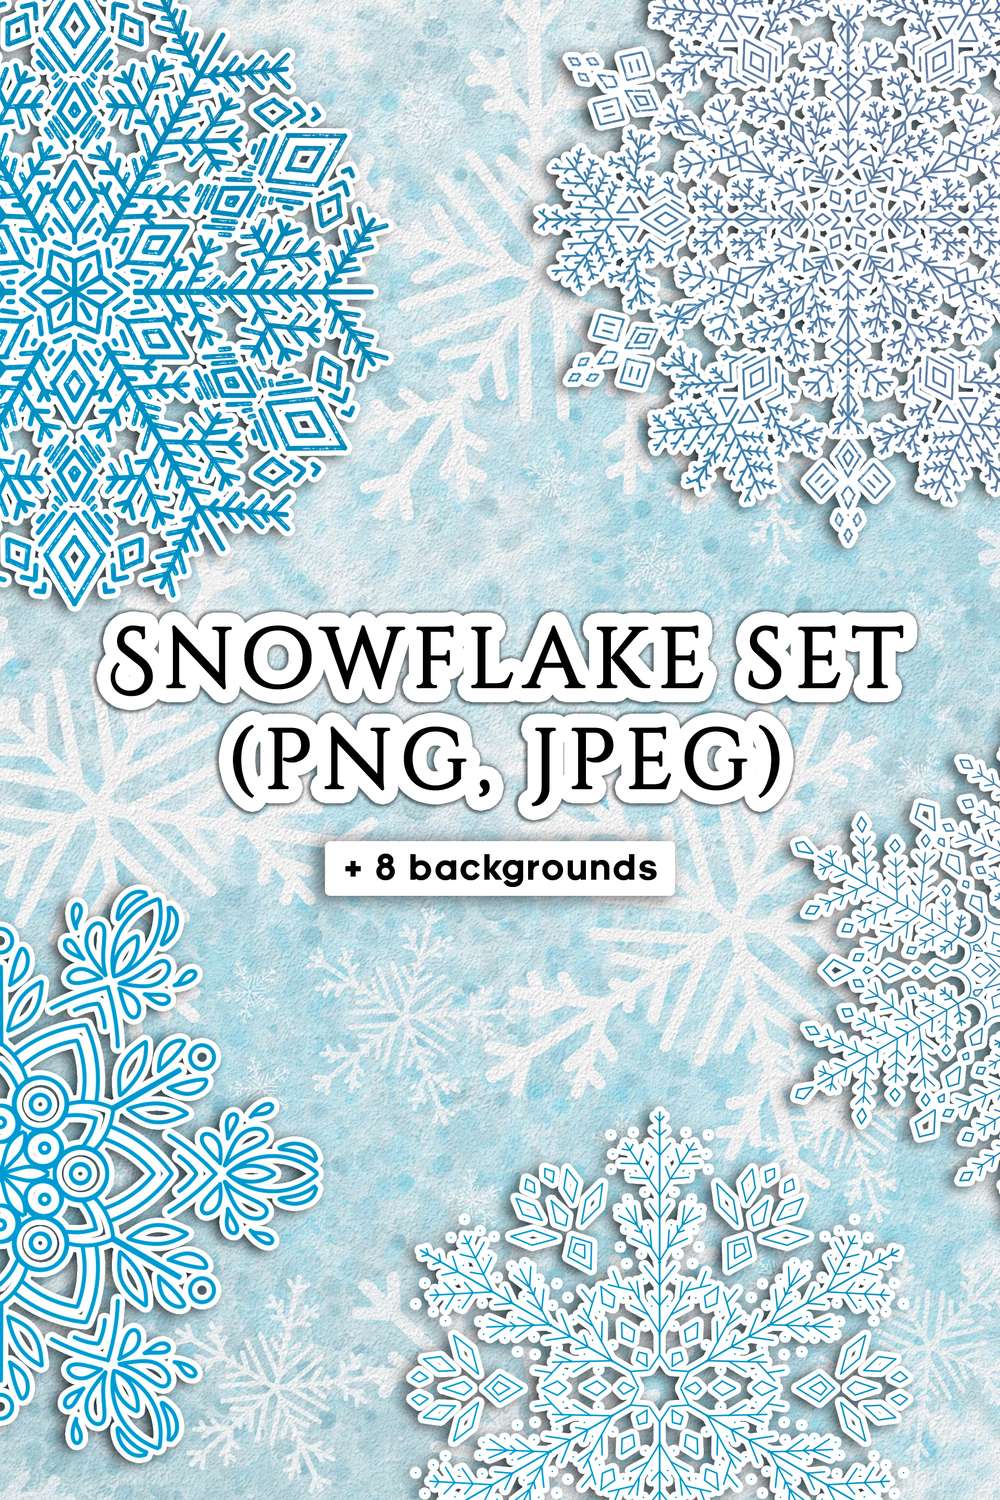 Snowflake Set + 8 Backgrounds - pinterest image preview.